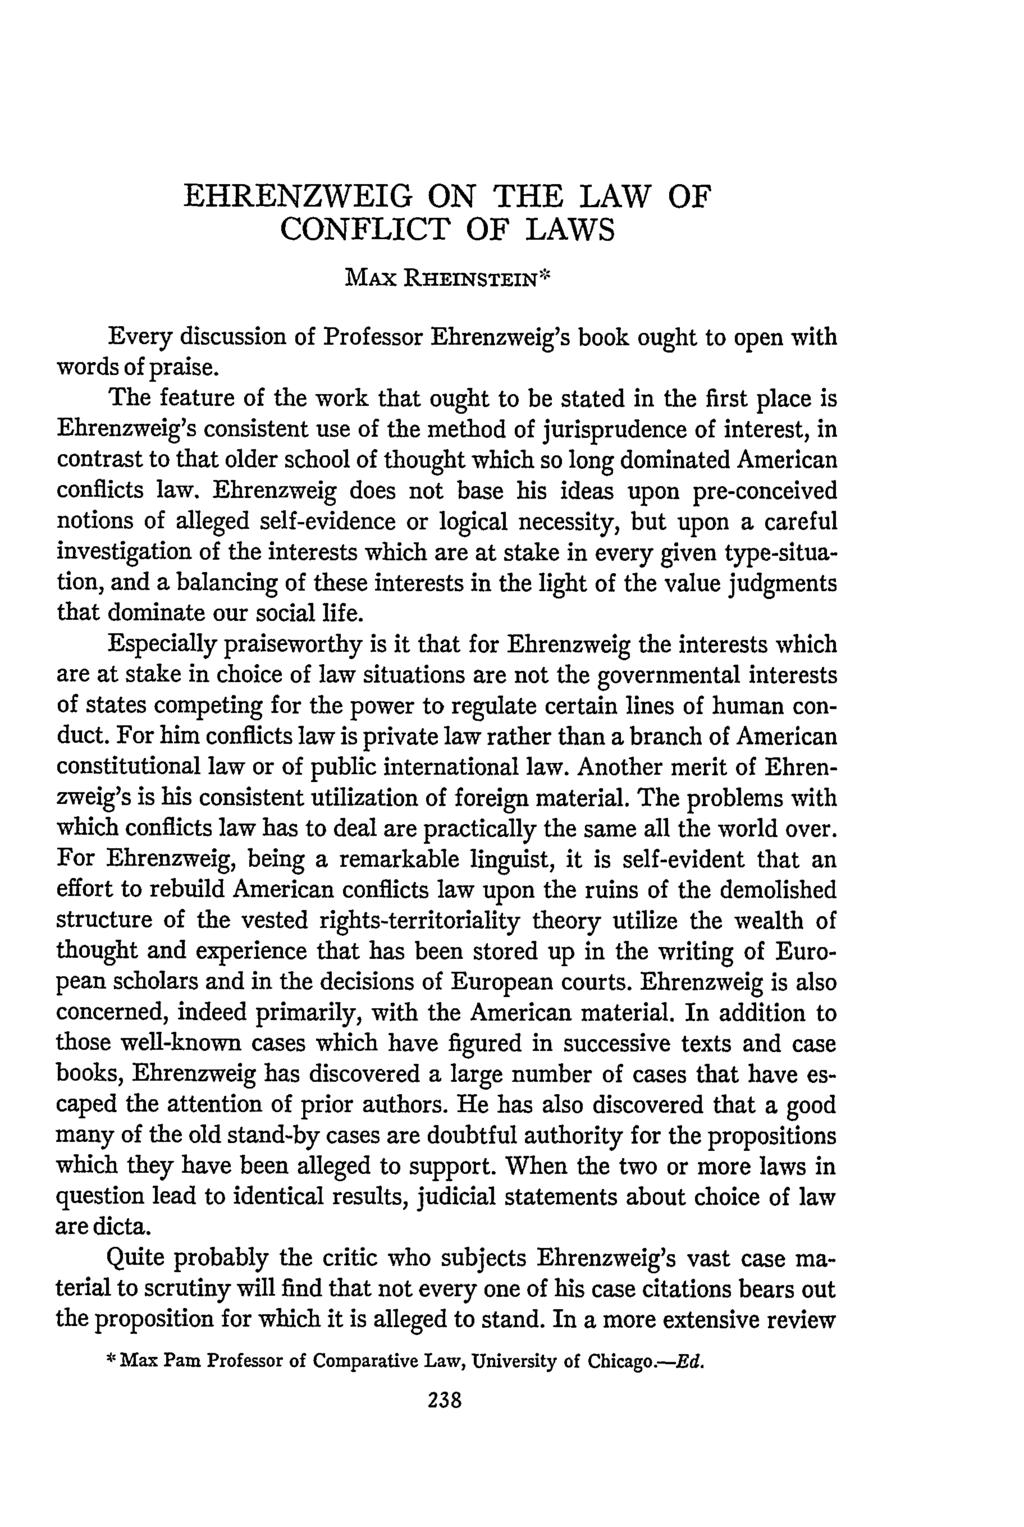 EHRENZWEIG ON THE LAW OF CONFLICT OF LAWS MAX RIIEINSTEIN* Every discussion of Professor Ehrenzweig's book ought to open with words of praise.